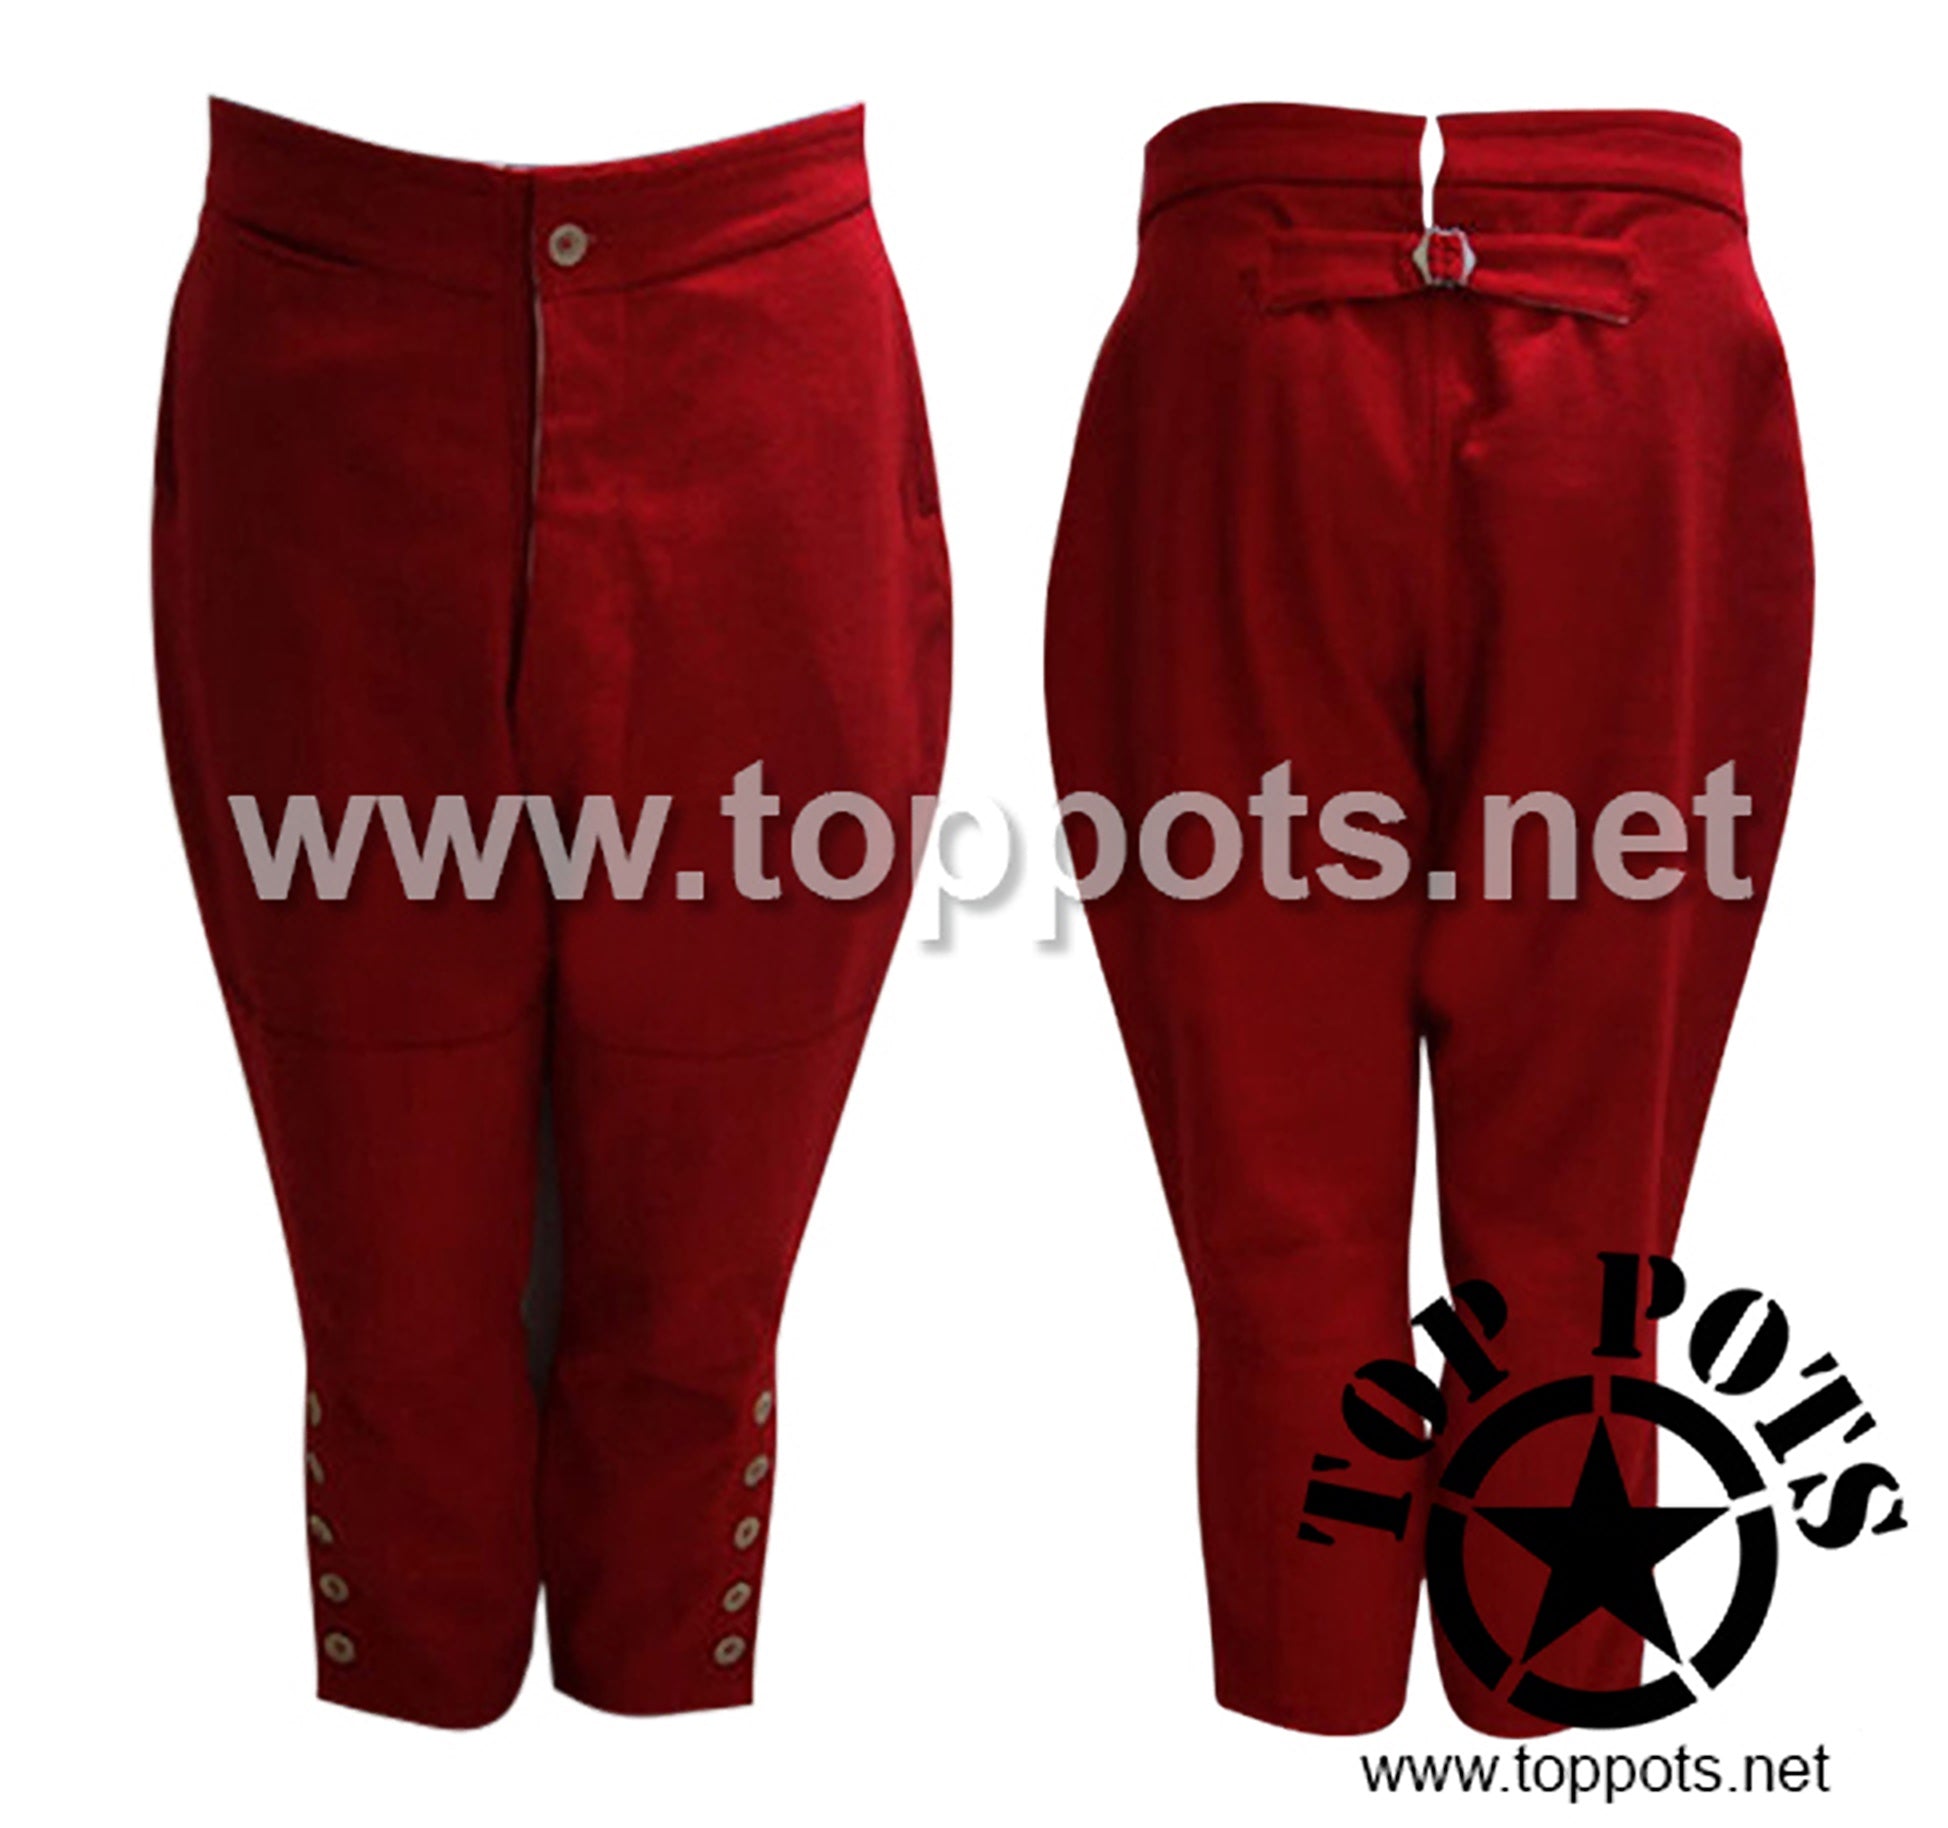 Featured Uniform - WWI French Army Uniform M1897 Red Pantaloons Trouser Breeches (Pants Only)